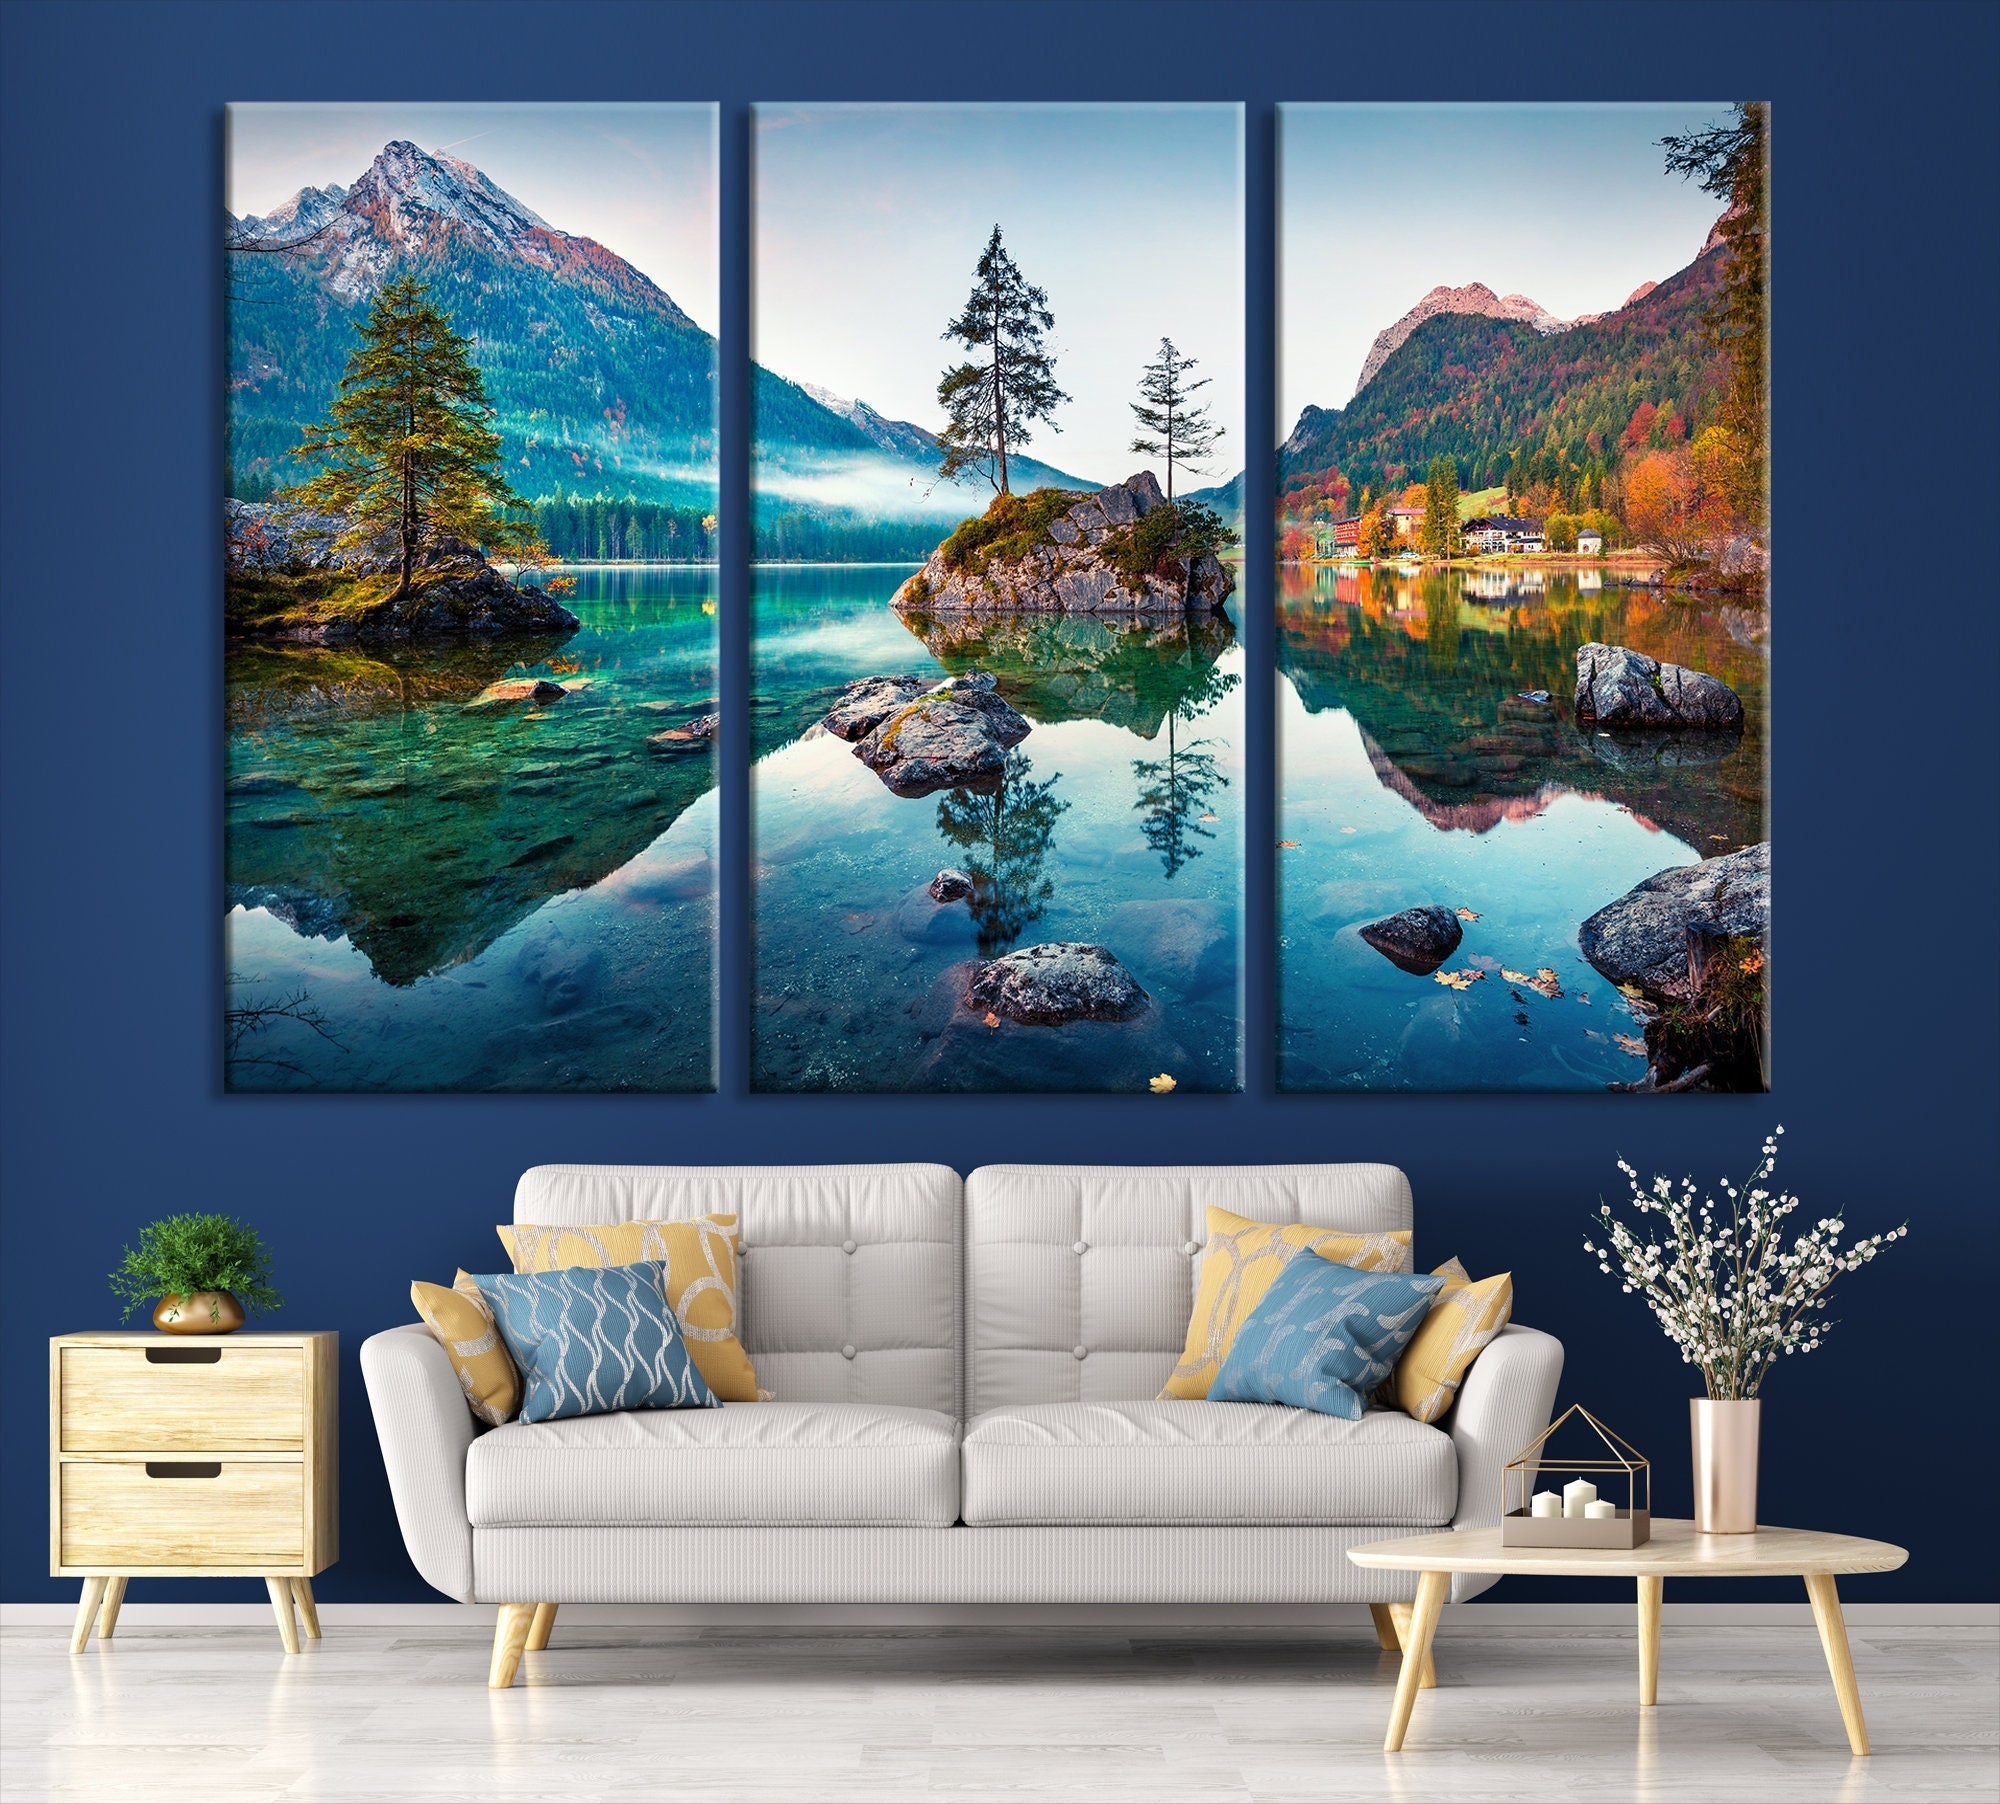 LSYALUCK large canvas wall art Quality Beautiful Artwork Painting Art On  Canvas Large Contemporary For Sleeping Room Wall Decor 50x100cm(20x39in)